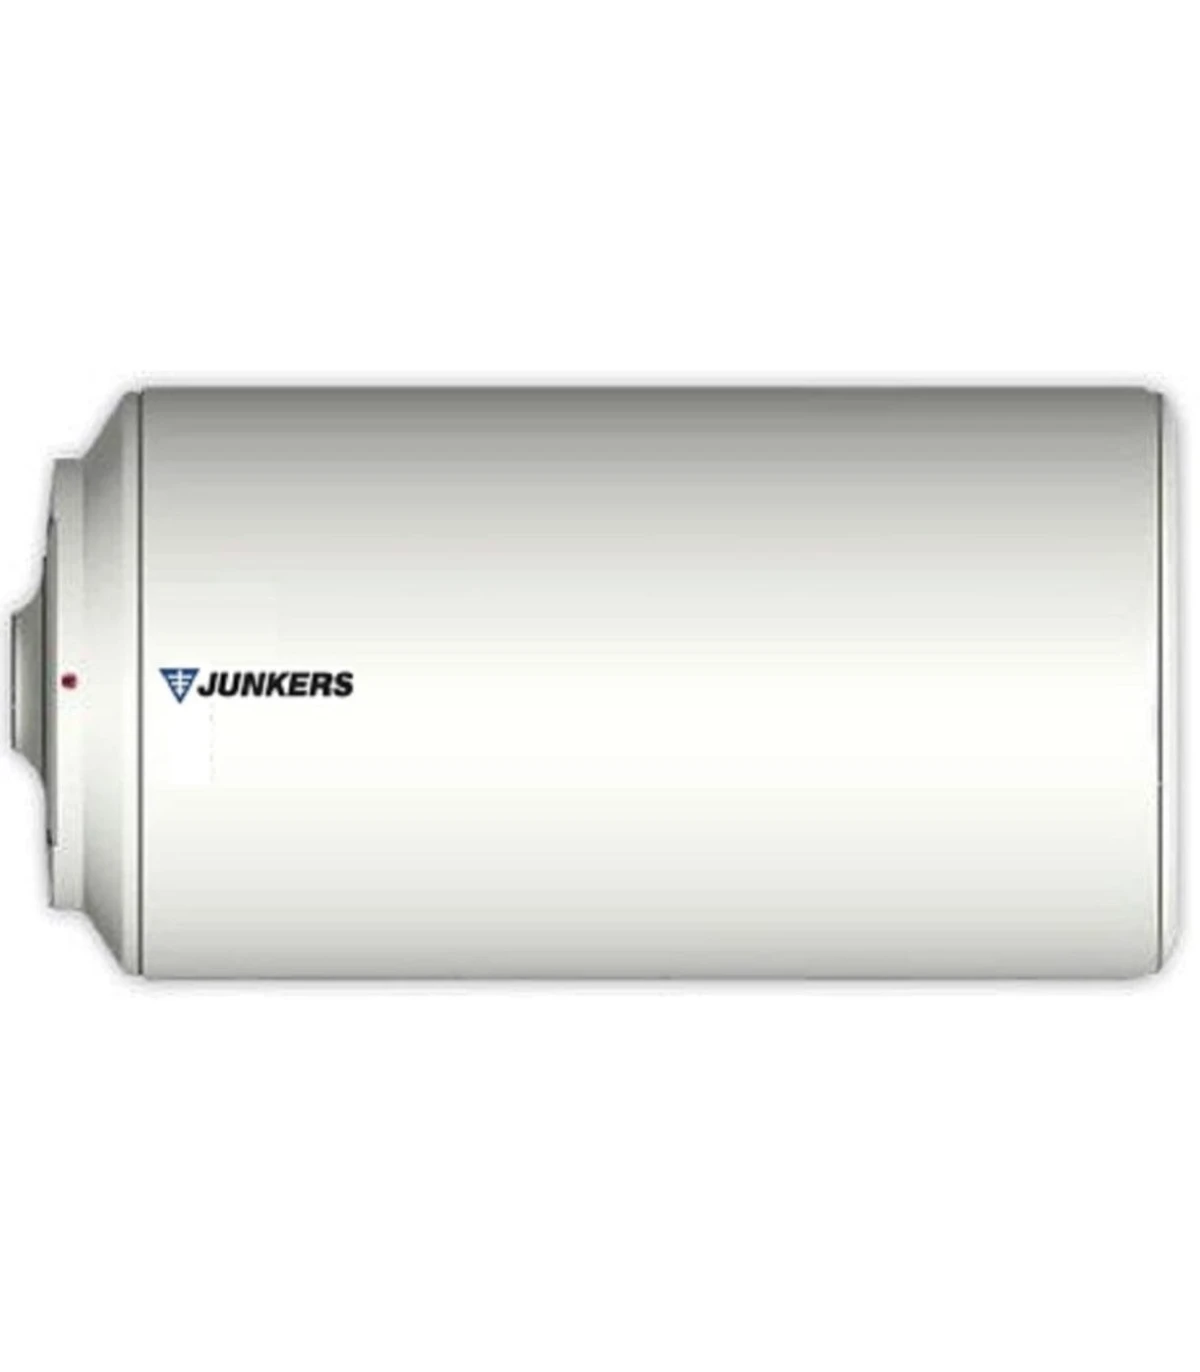 Termo eléctrico Junkers Elacell Horizontal 50L